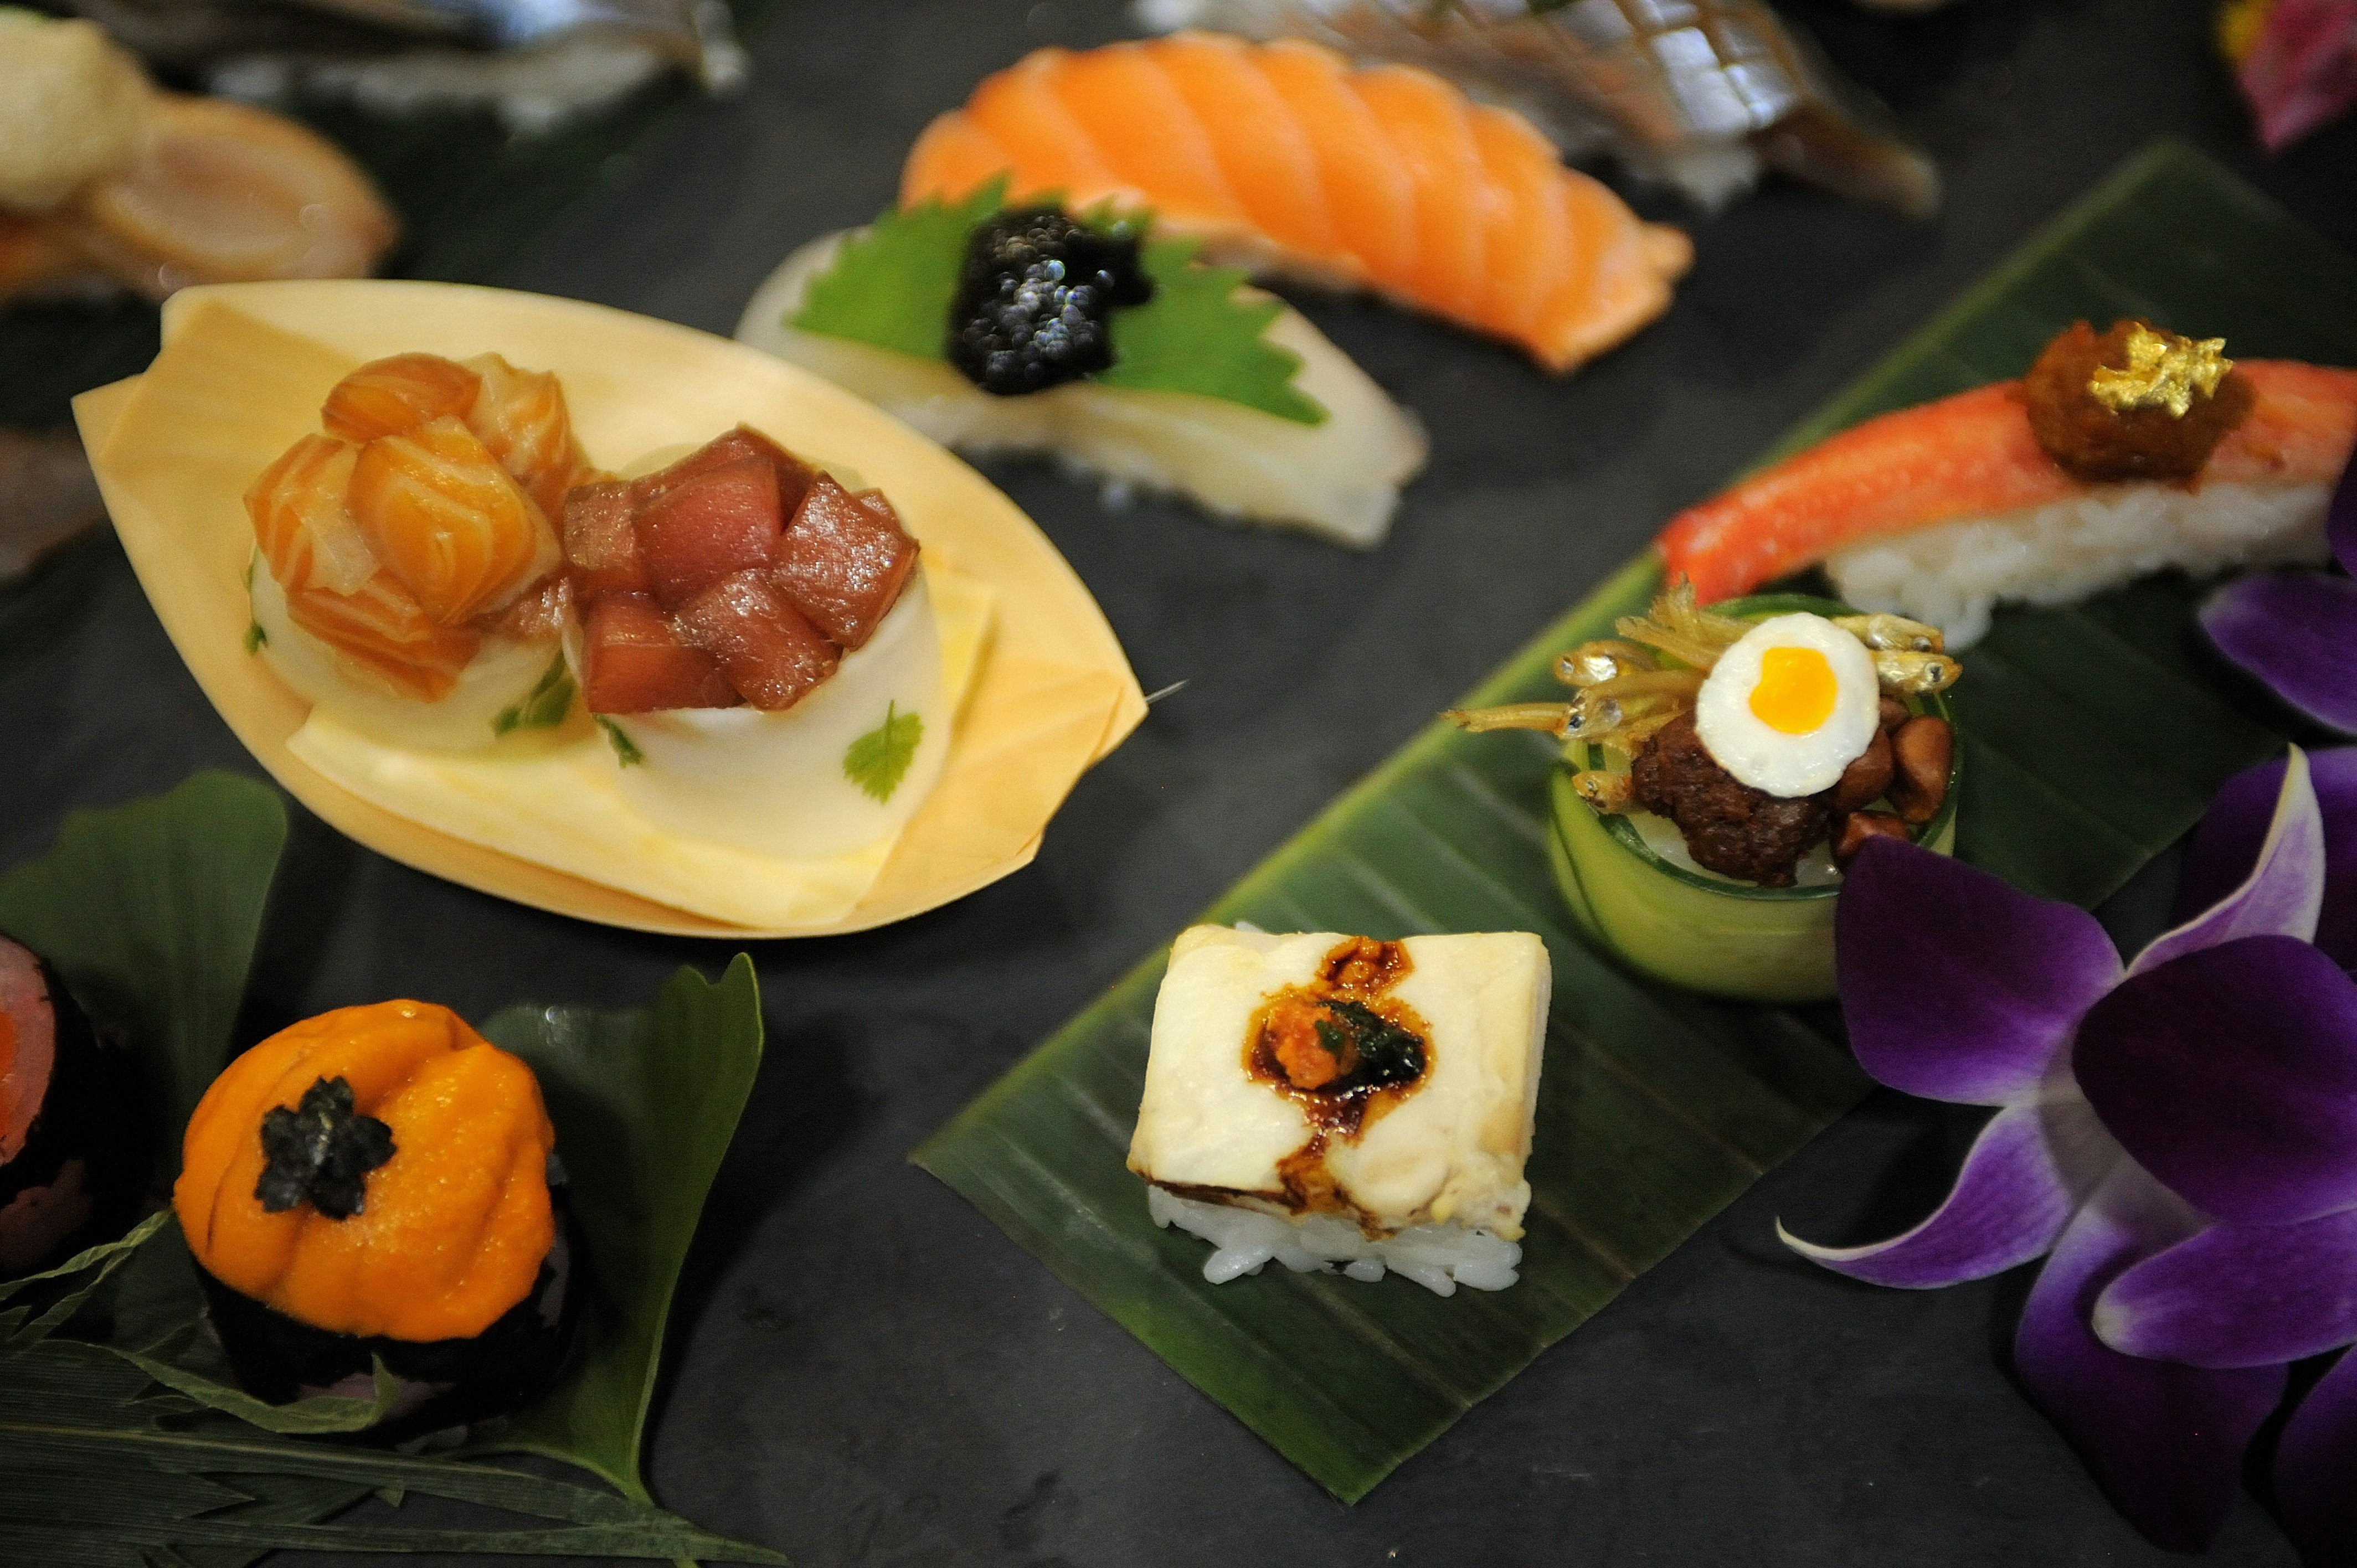 Ornate arrangements of sushi and small plates are arranged on leaves and in bamboo containers